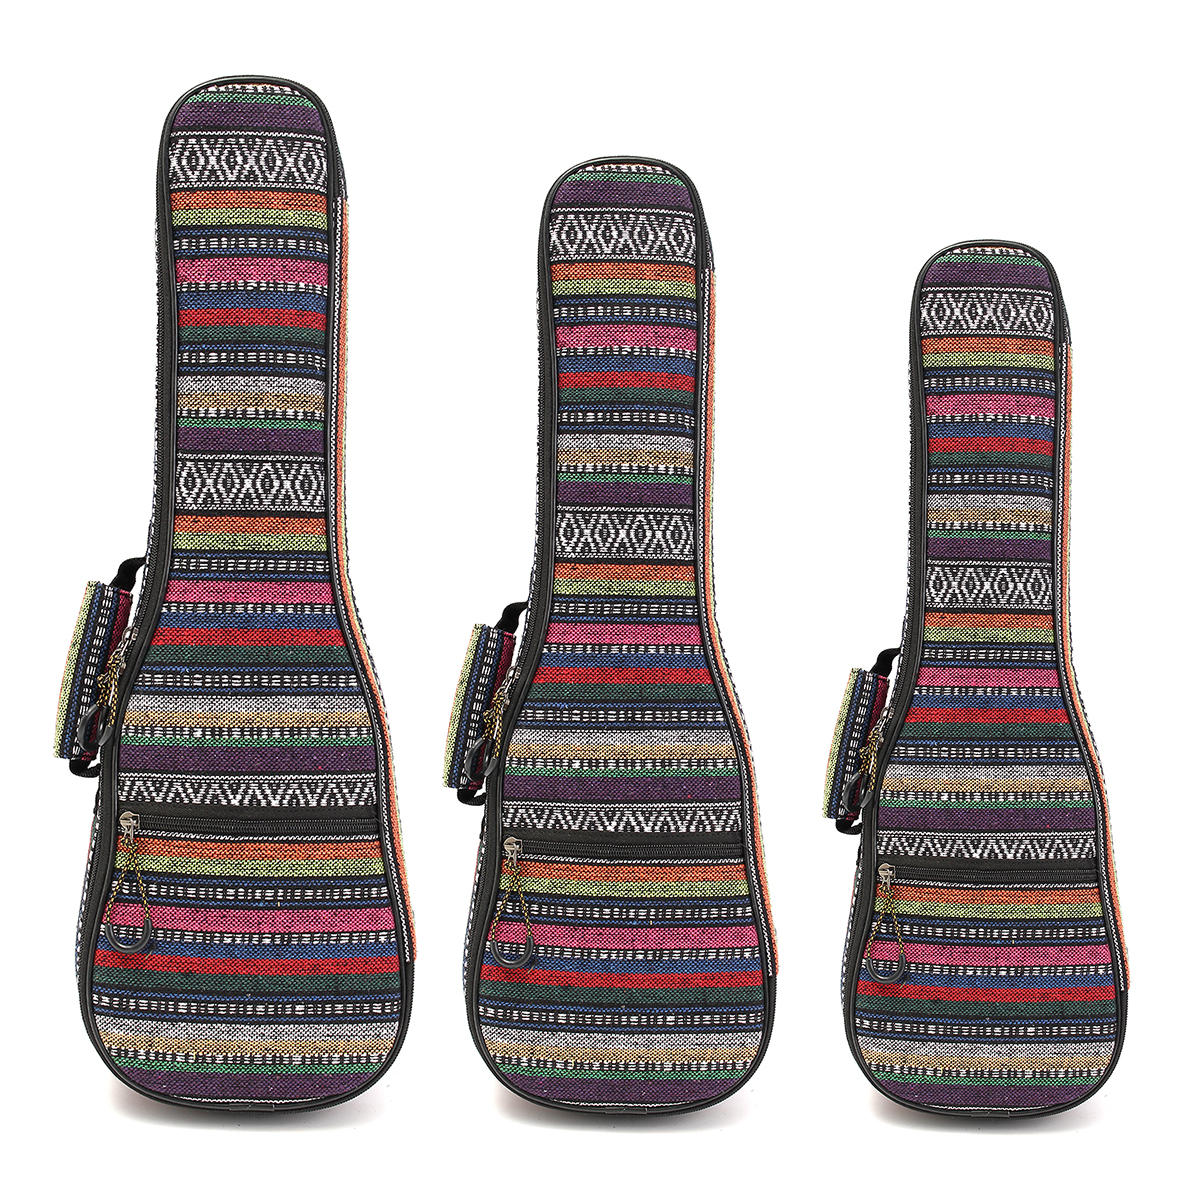 21 23 26 Inch Double Strap Hand Folk Canvas Ukulele Case Soft Padded Carry Protect Backpack Cover Gig Bag